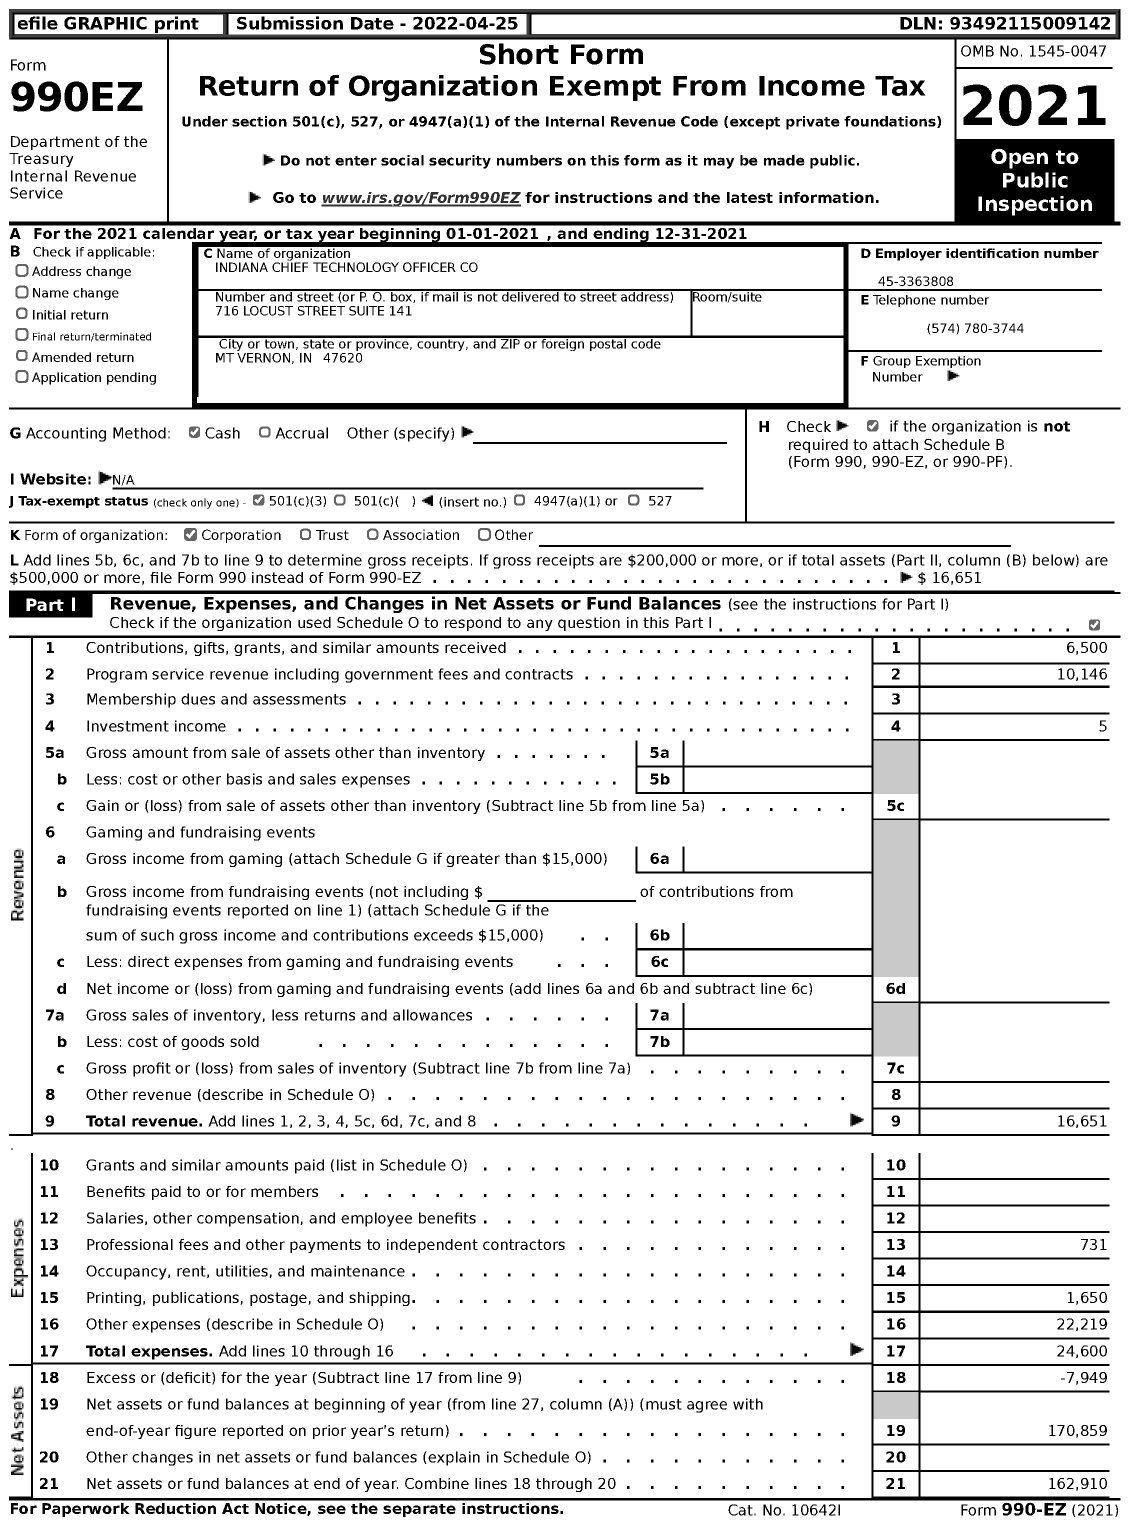 Image of first page of 2021 Form 990EZ for Indiana Chief Technology Officer